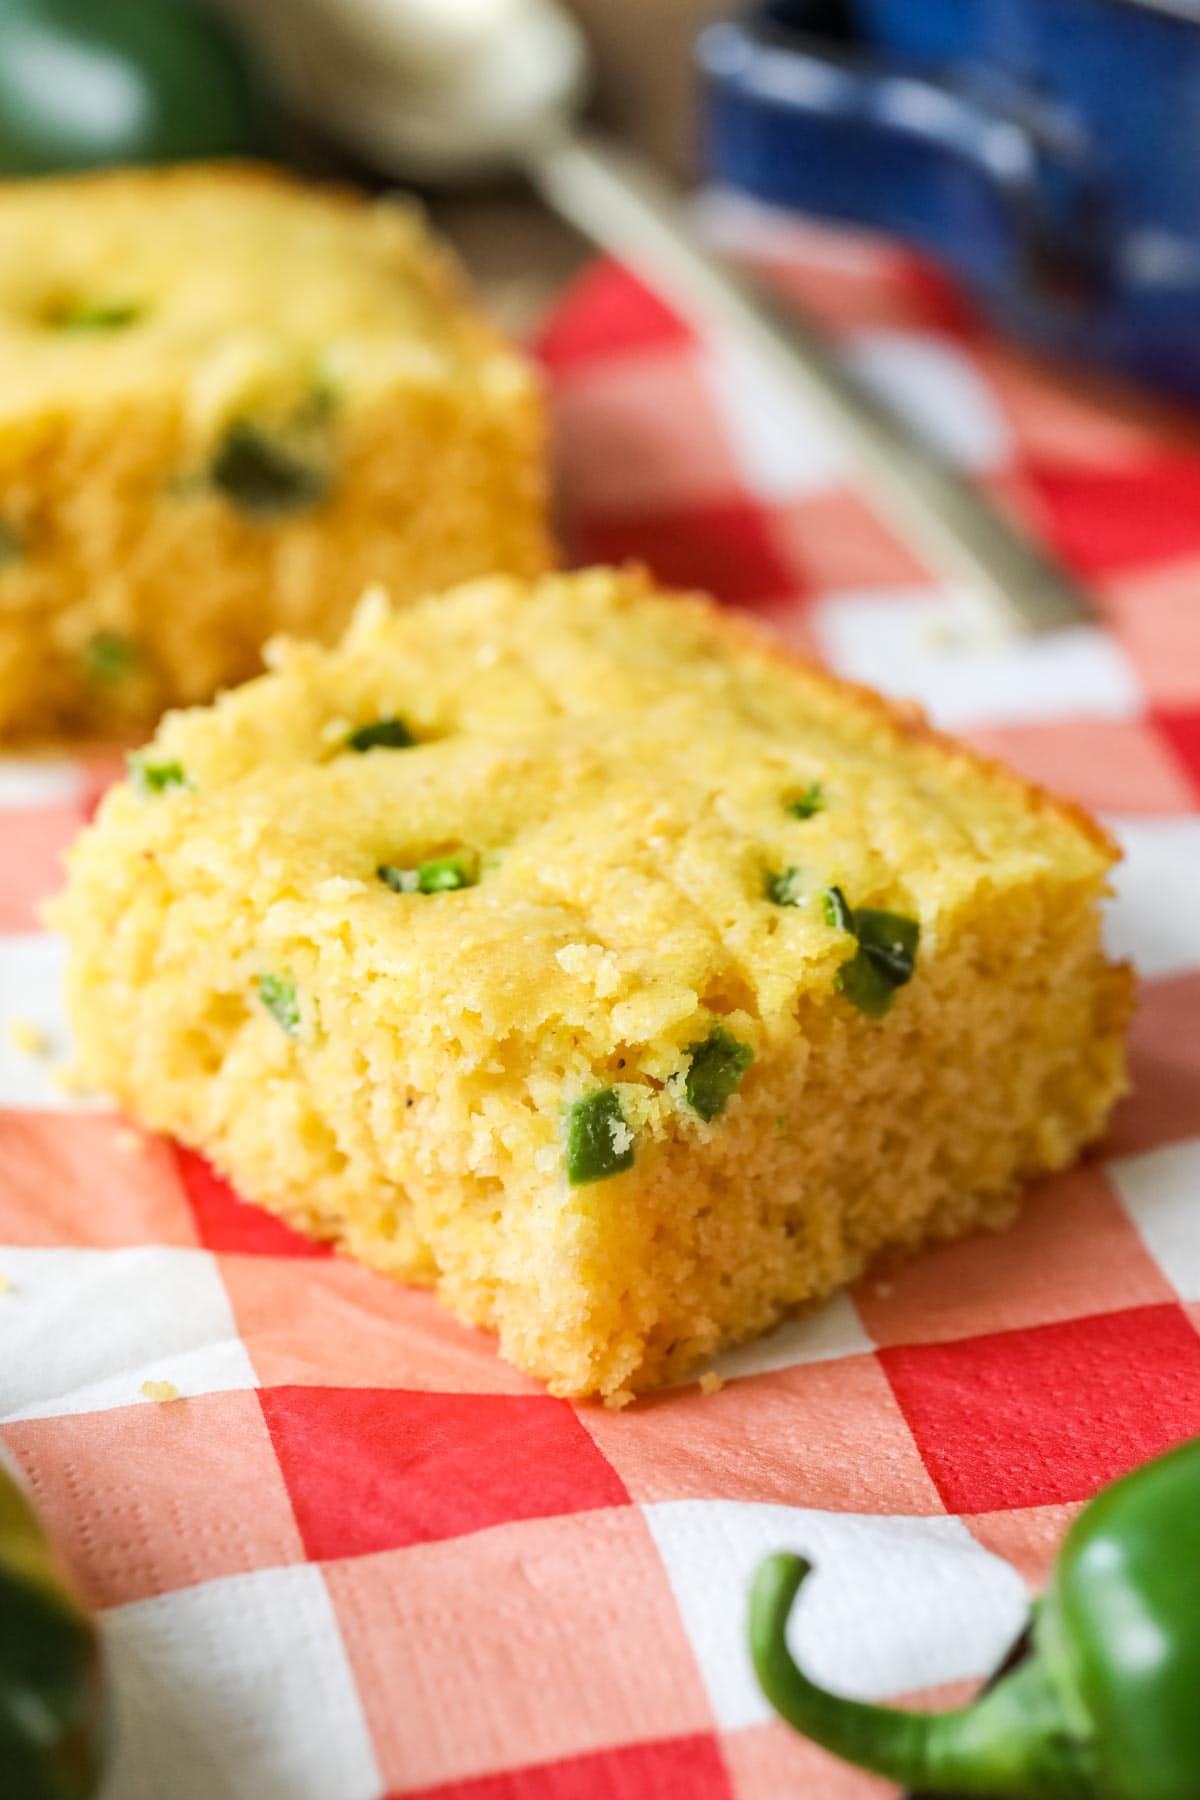 Square slice of jalapeno cornbread on a red checked tablecloth.